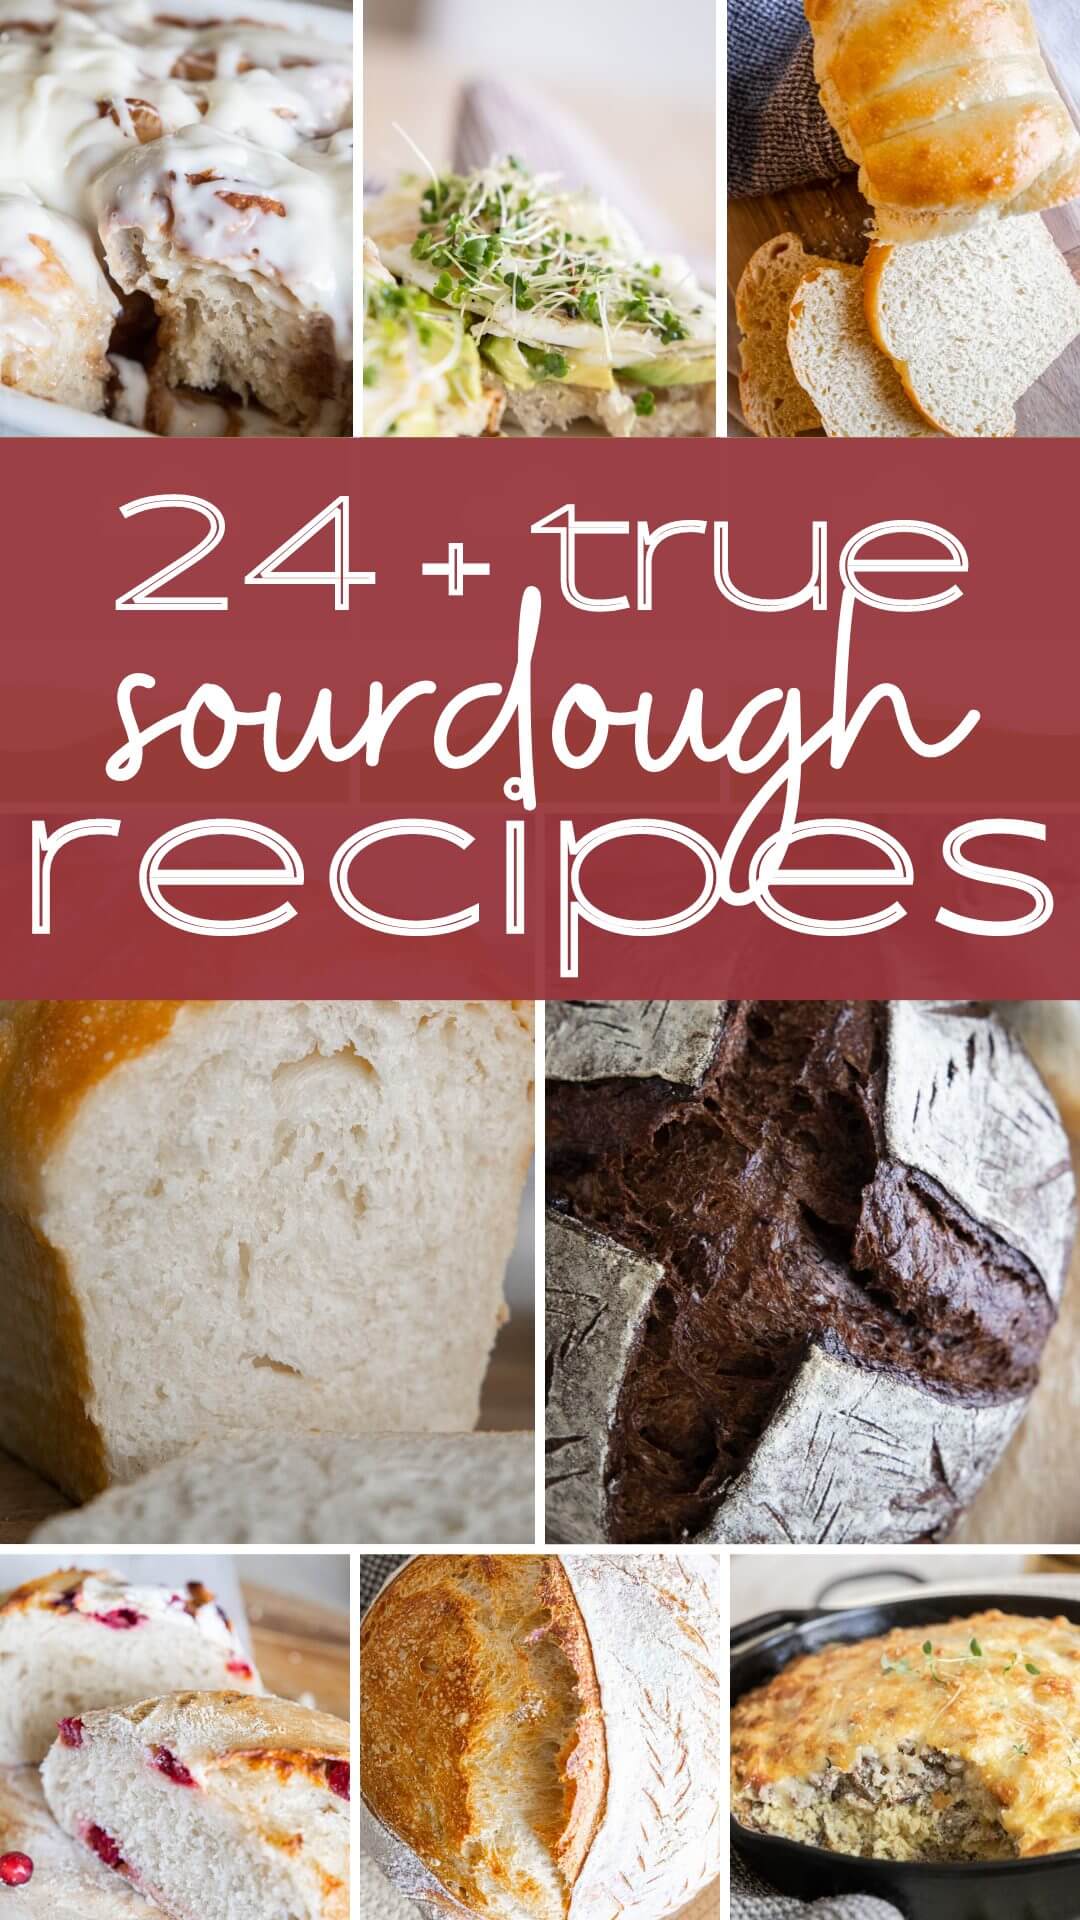 24 amazing sourdough recipes perfect for beginners and seasoned sourdough bakers! These are all great recipes to add to your collection.